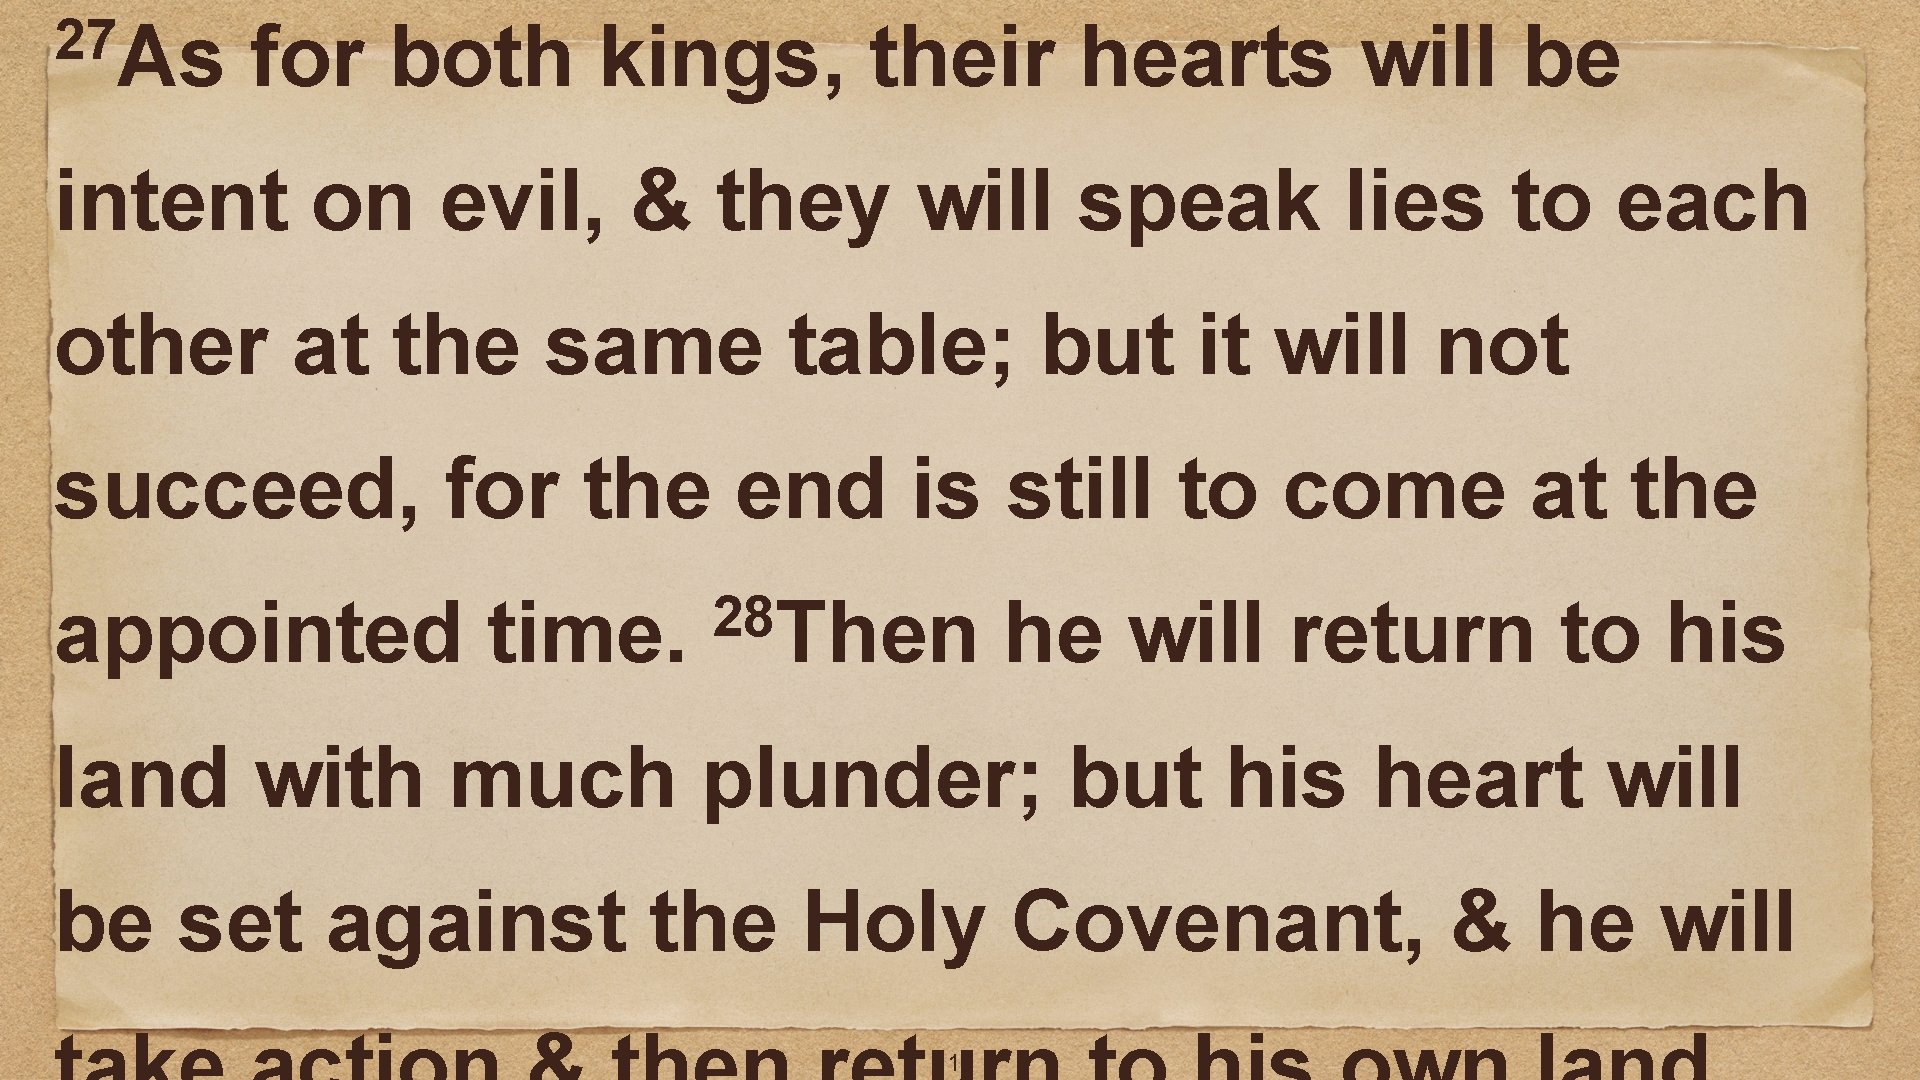 27 As for both kings, their hearts will be intent on evil, & they